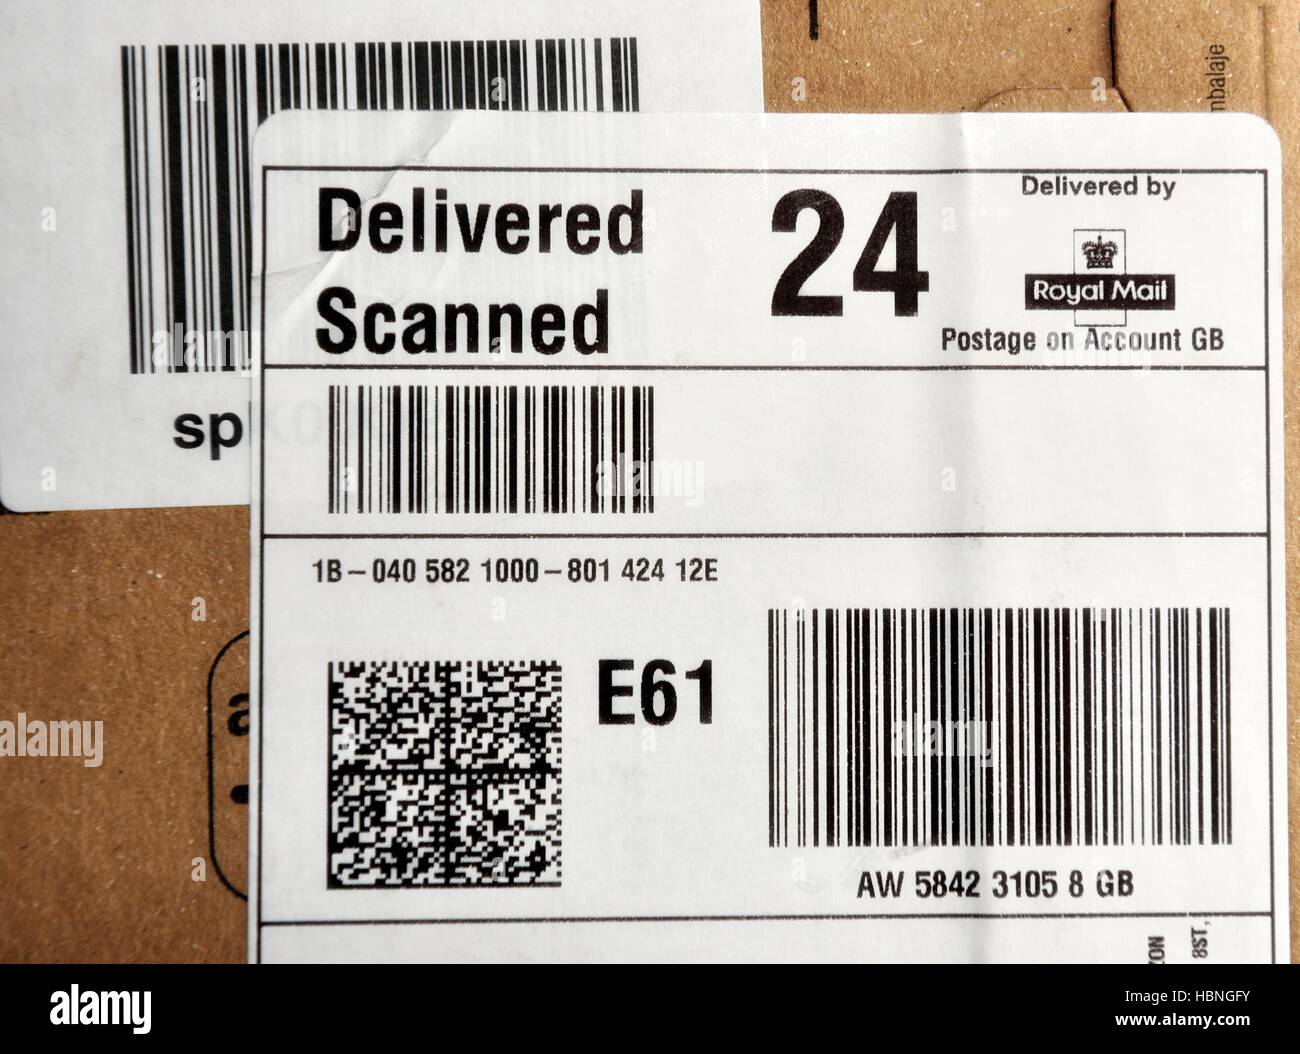 A Royal Mail Delivered Scanned Parcel Label Stock Photo Royalty Free